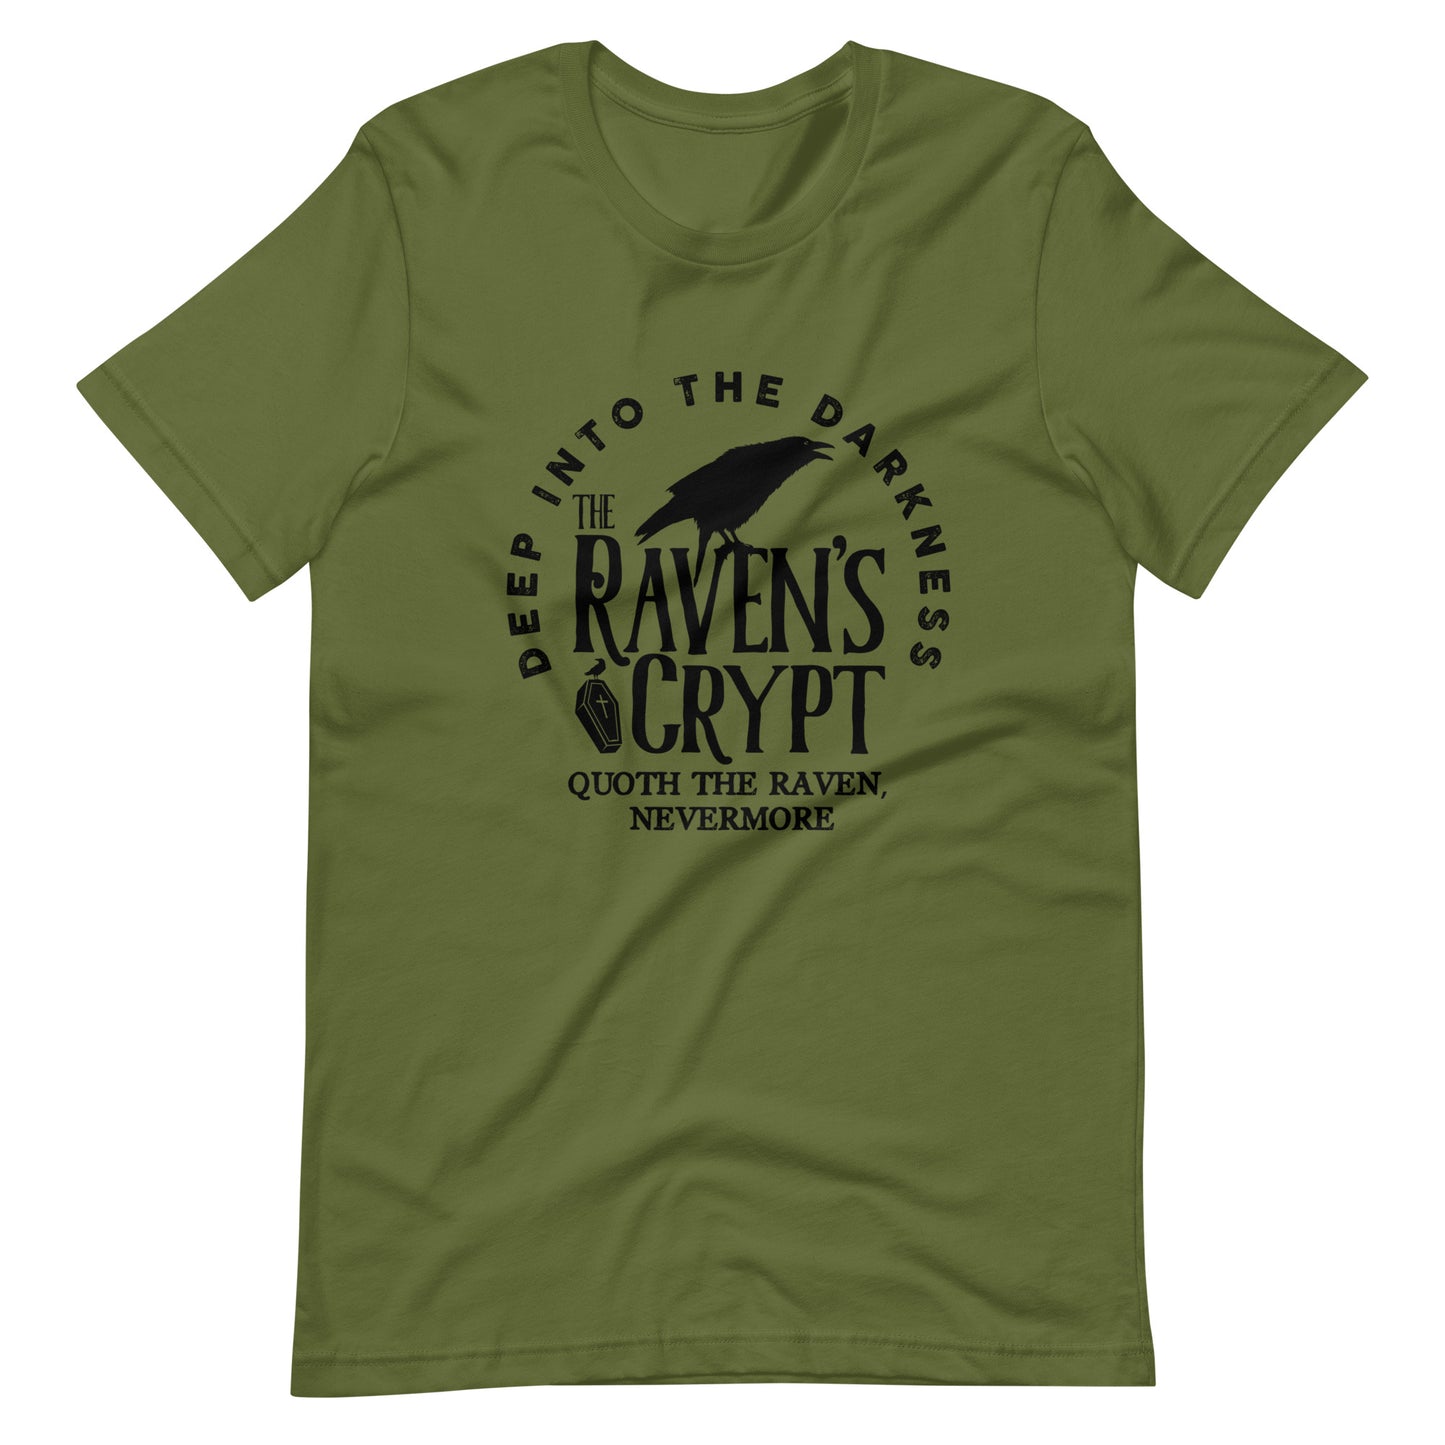 Deep Into the Darkness The Raven's Crypt - Men's t-shirt - Olive Front